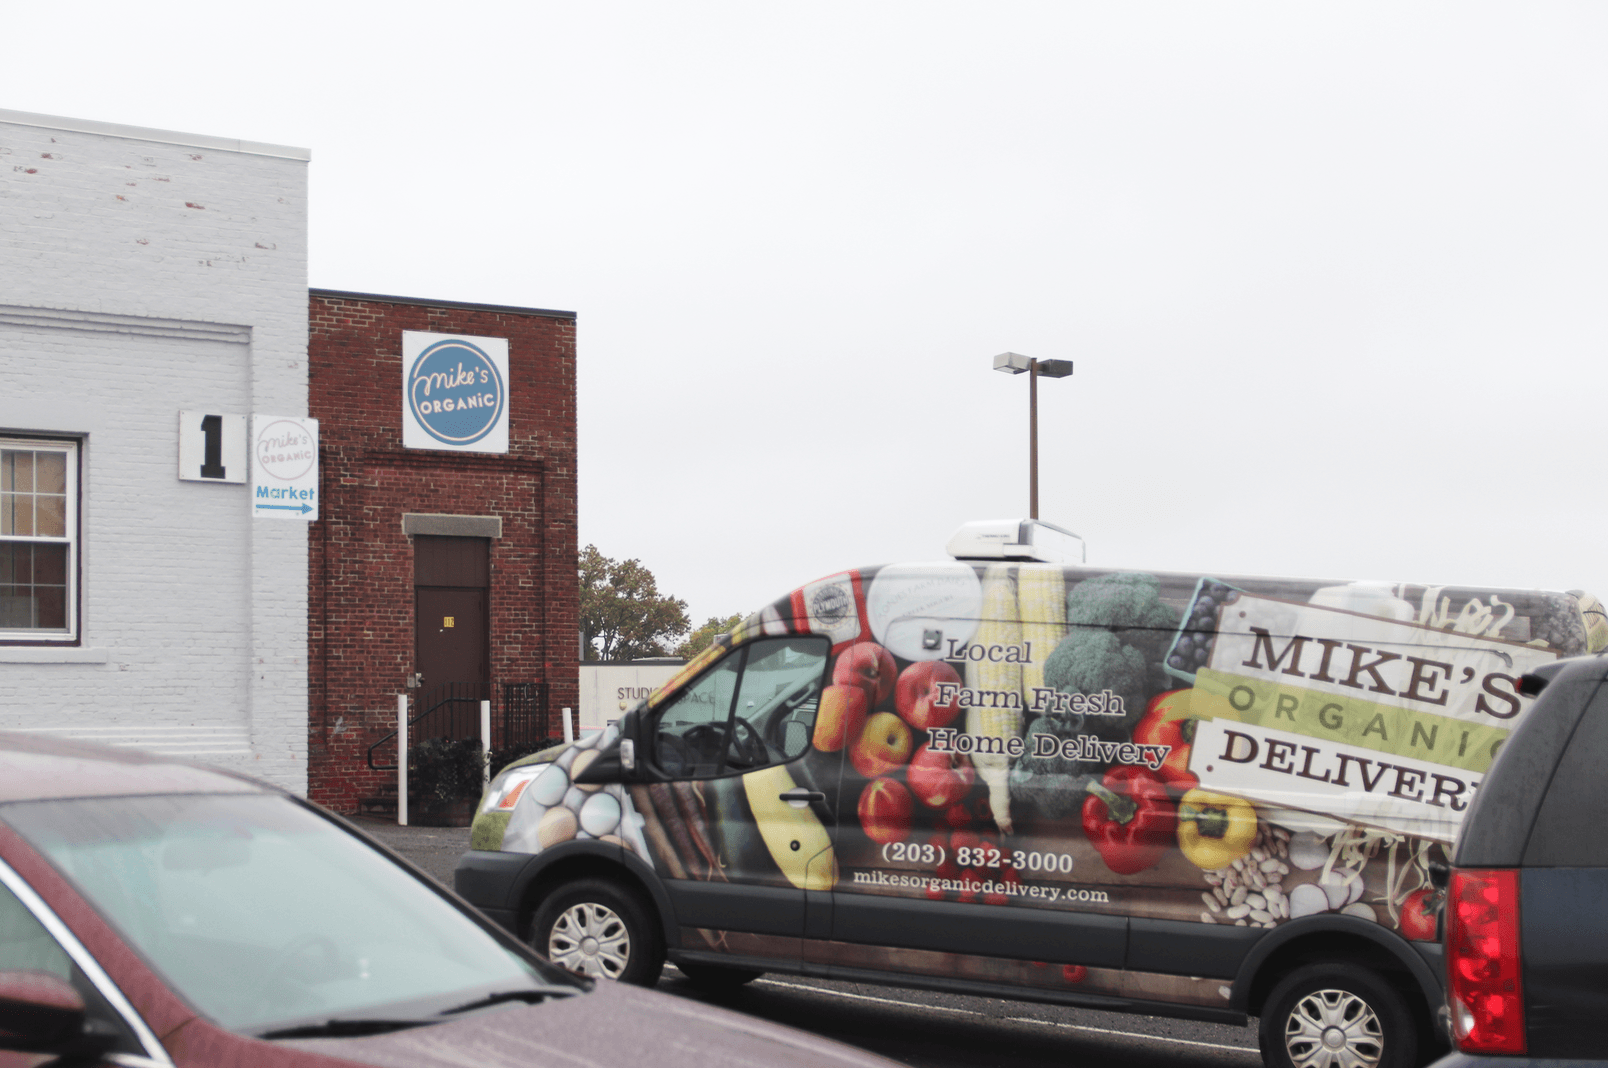 Visit Mike's Organic Market is located at 377 Fairfield Ave, BLDG 1 in Stamford, CT 06902 (next to the Loading Dock.) Photo: Leslie Yager